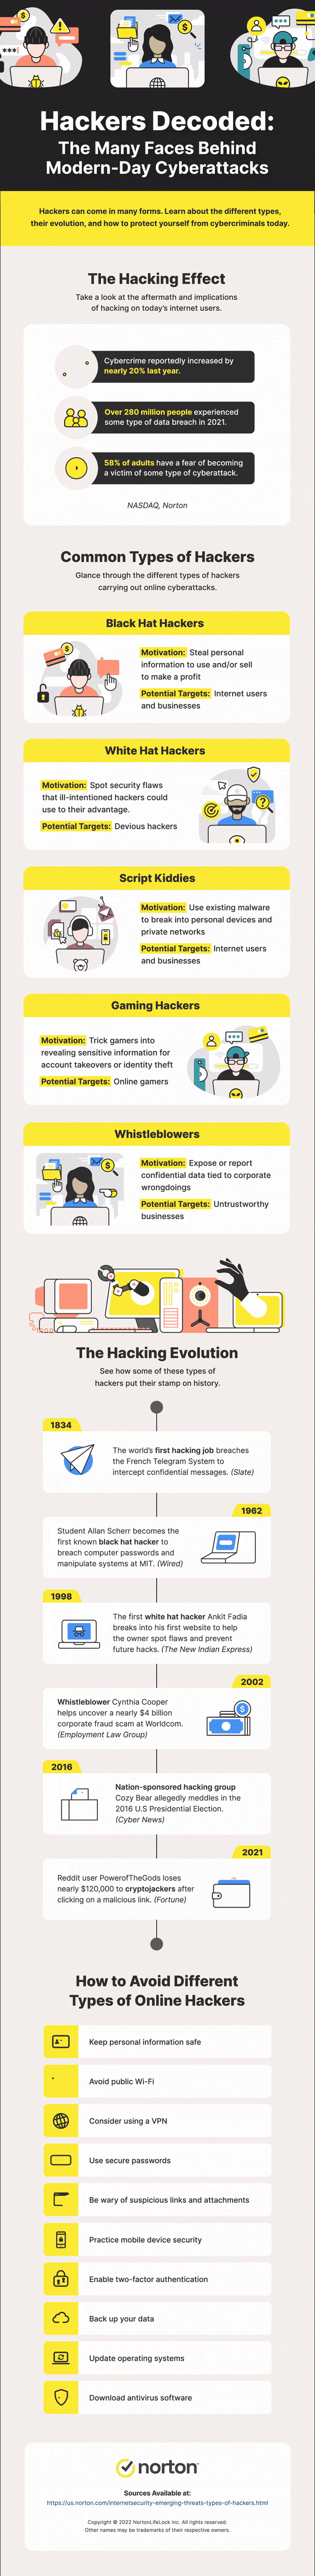 An infographic all about hackers, including who they are, how they damage systems, and the impact they have on individuals, companies, and society at large. 